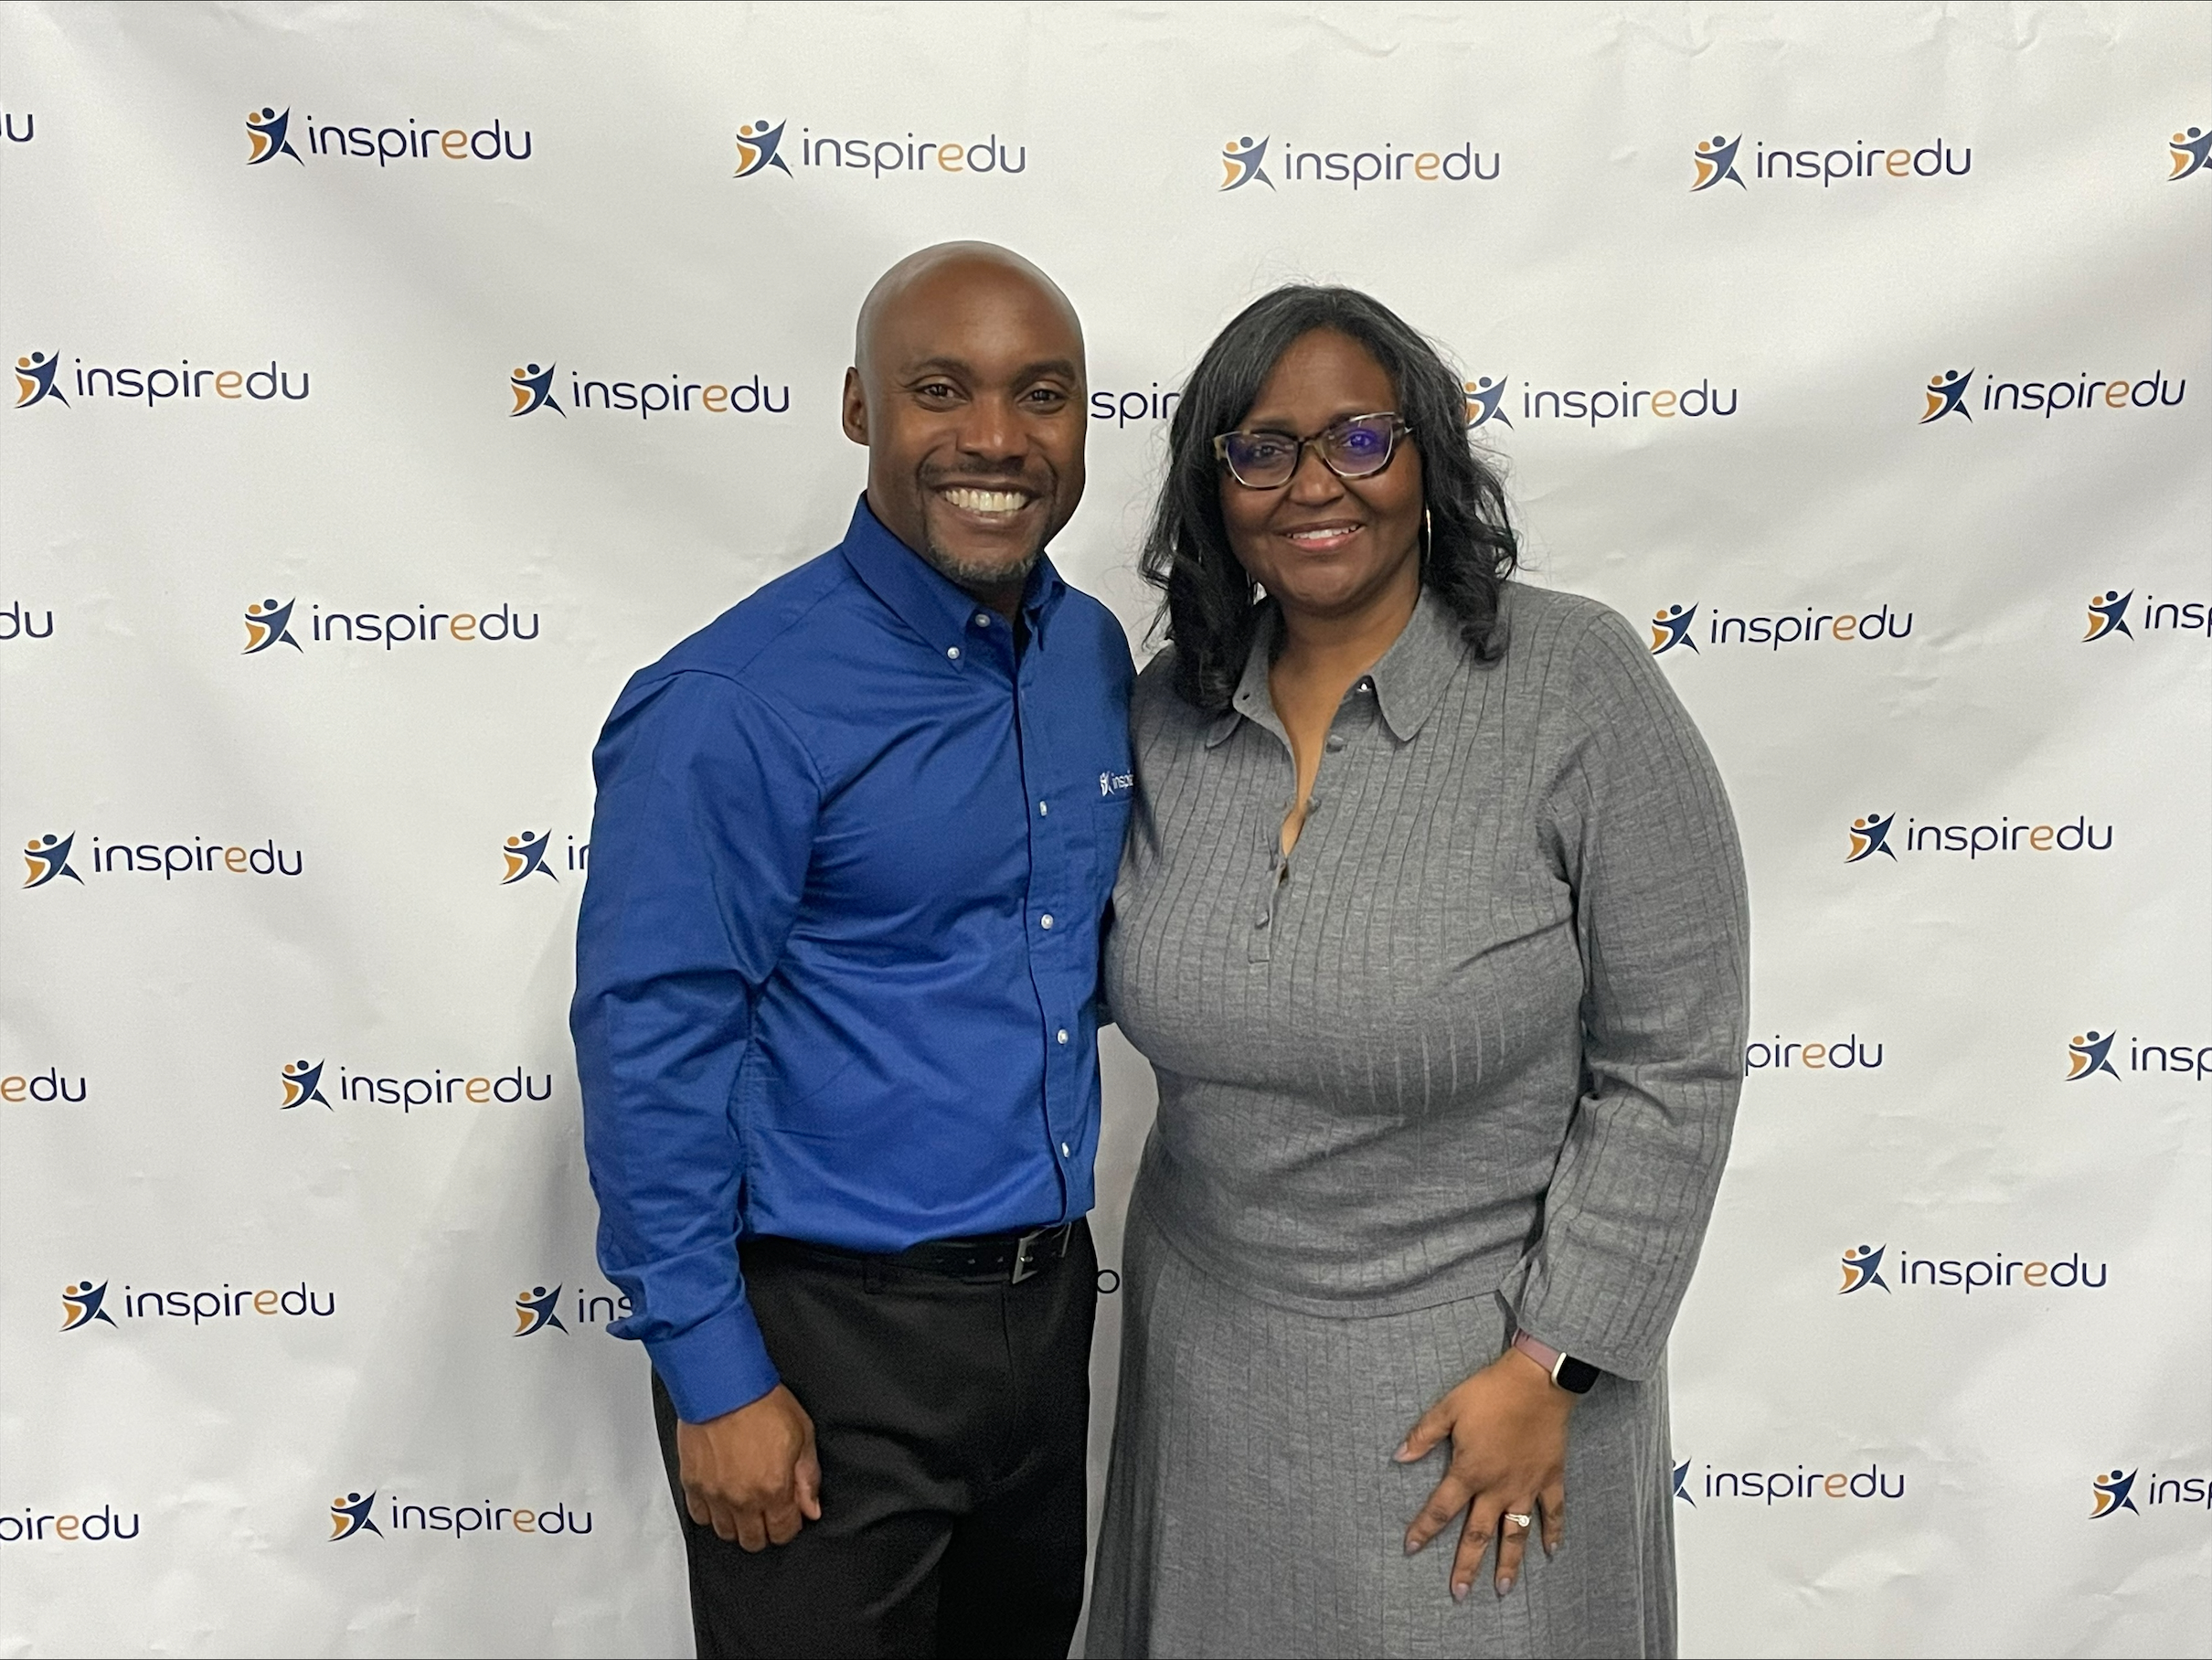 Richard Hicks, CEO & President at Inspiredu pictured with Lisa Walker-Holloway, Senior Manager, External Affairs at Comcast